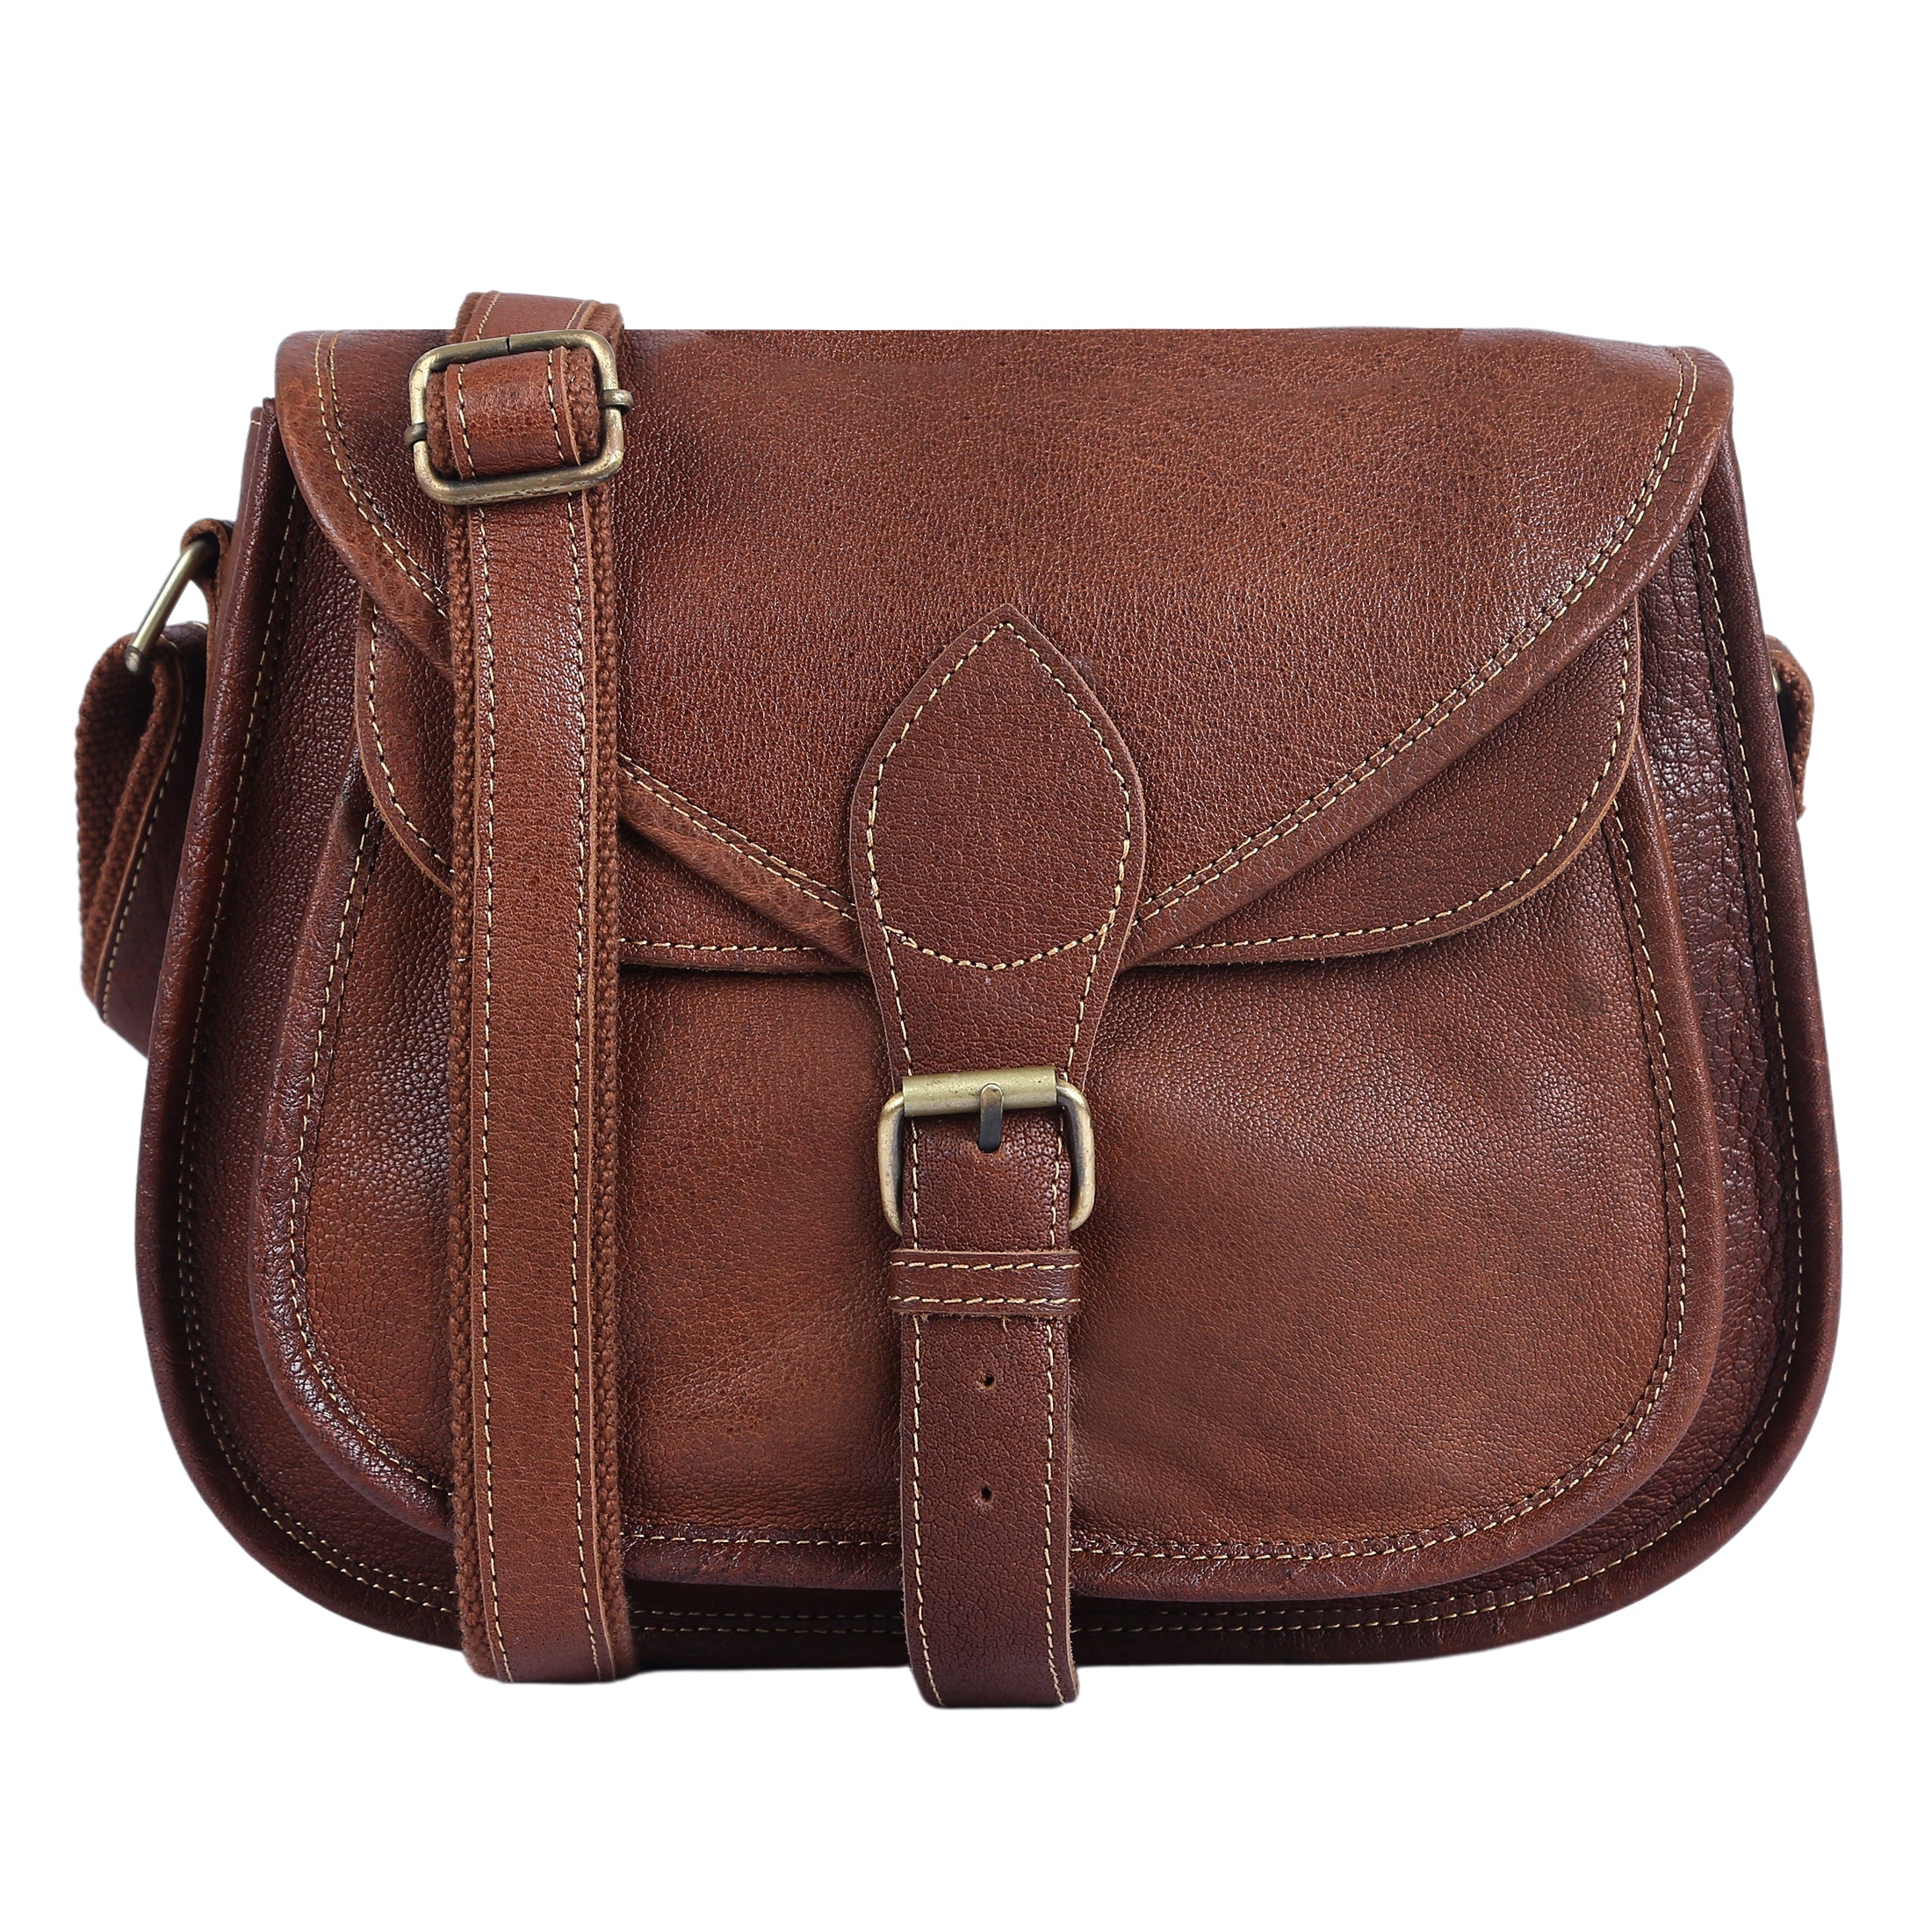 Leather Crossbody 12 inch Bag for women purse tote ladies bags satchel  travel tote shoulder bag